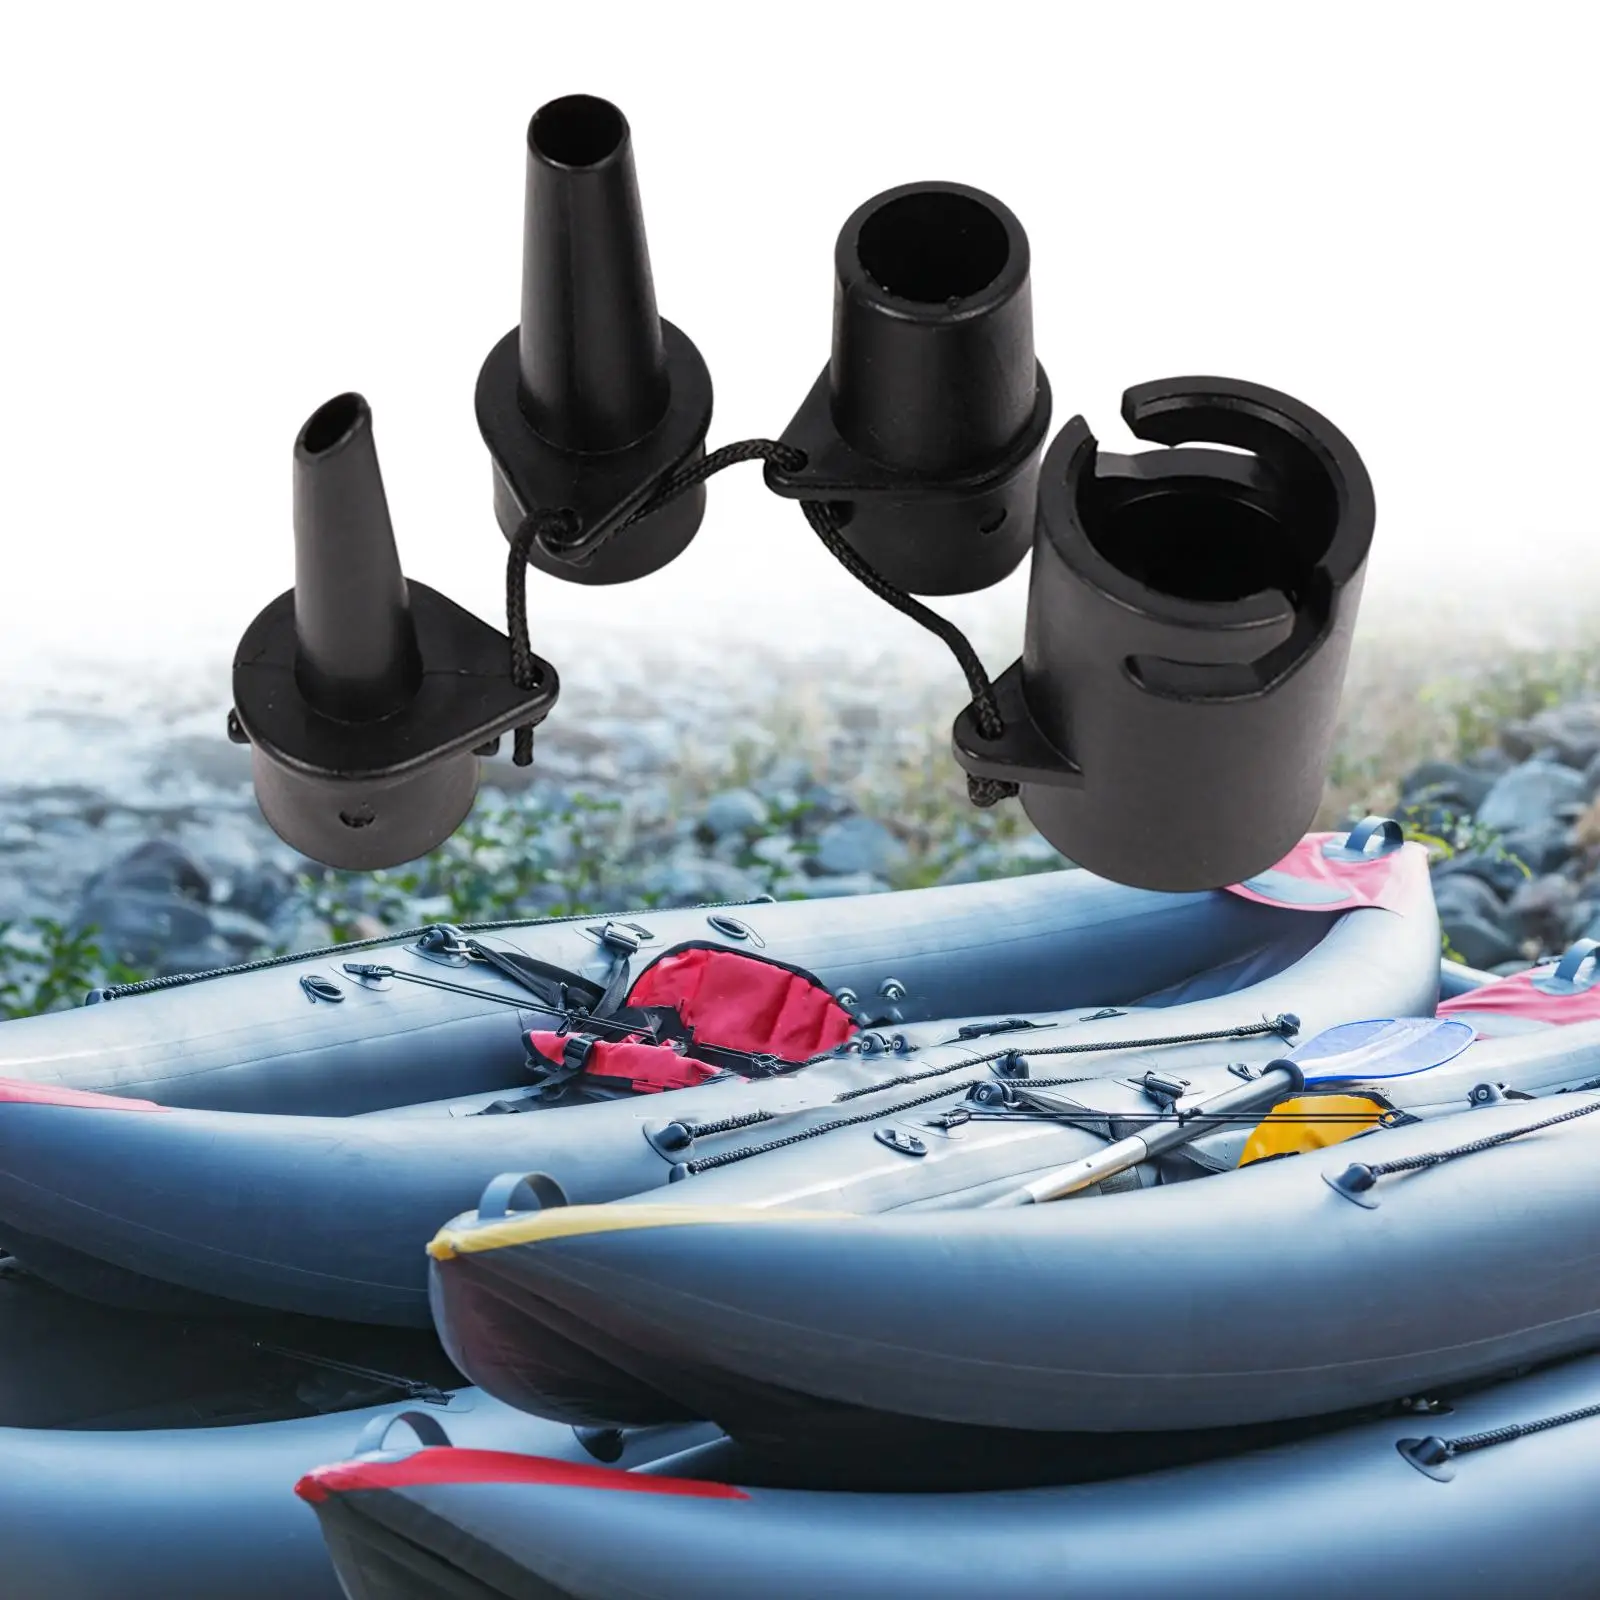 Valve Adapter Portable Kayak Inflatable Pump Adapter Air Valve Attachment for Dinghy Inflatable Kayak Rubber Boats Boat